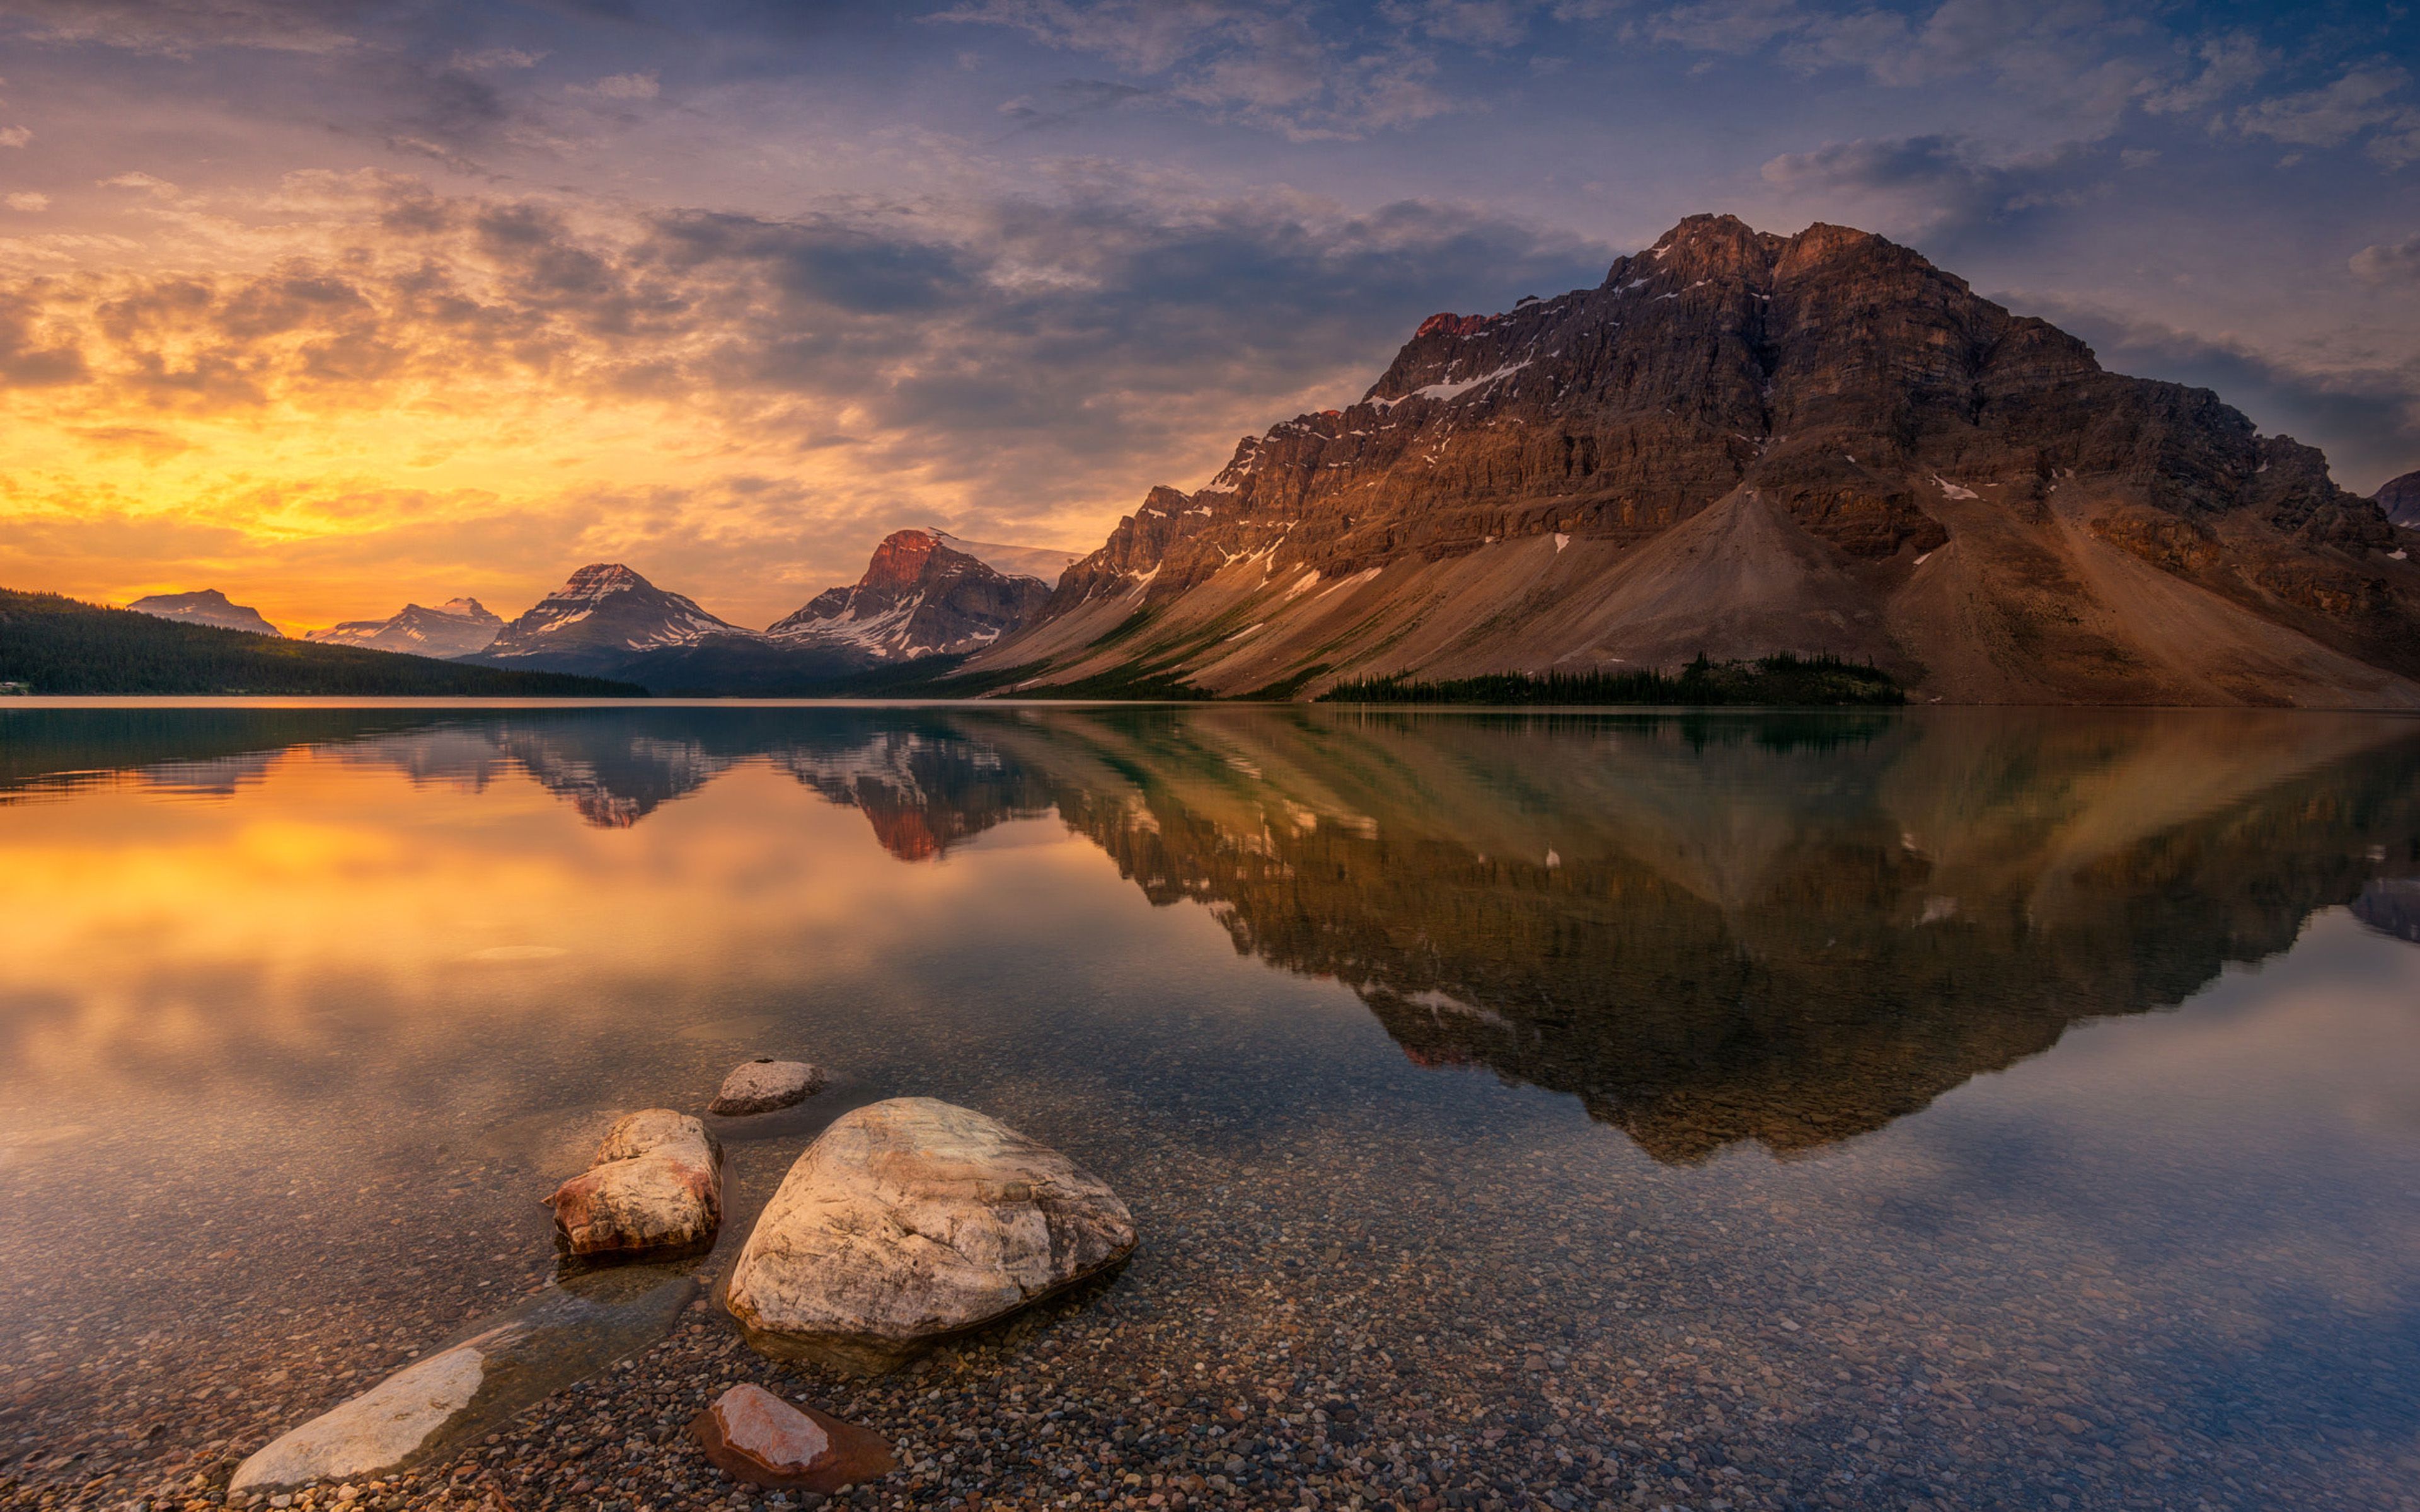 Bow Lake At An Altitude Of 1920 M In Western Alberta Canada Landscape Sunrise Desktop HD Wallpaper For Pc Tablet And Mobile 3840x2400, Wallpaper13.com